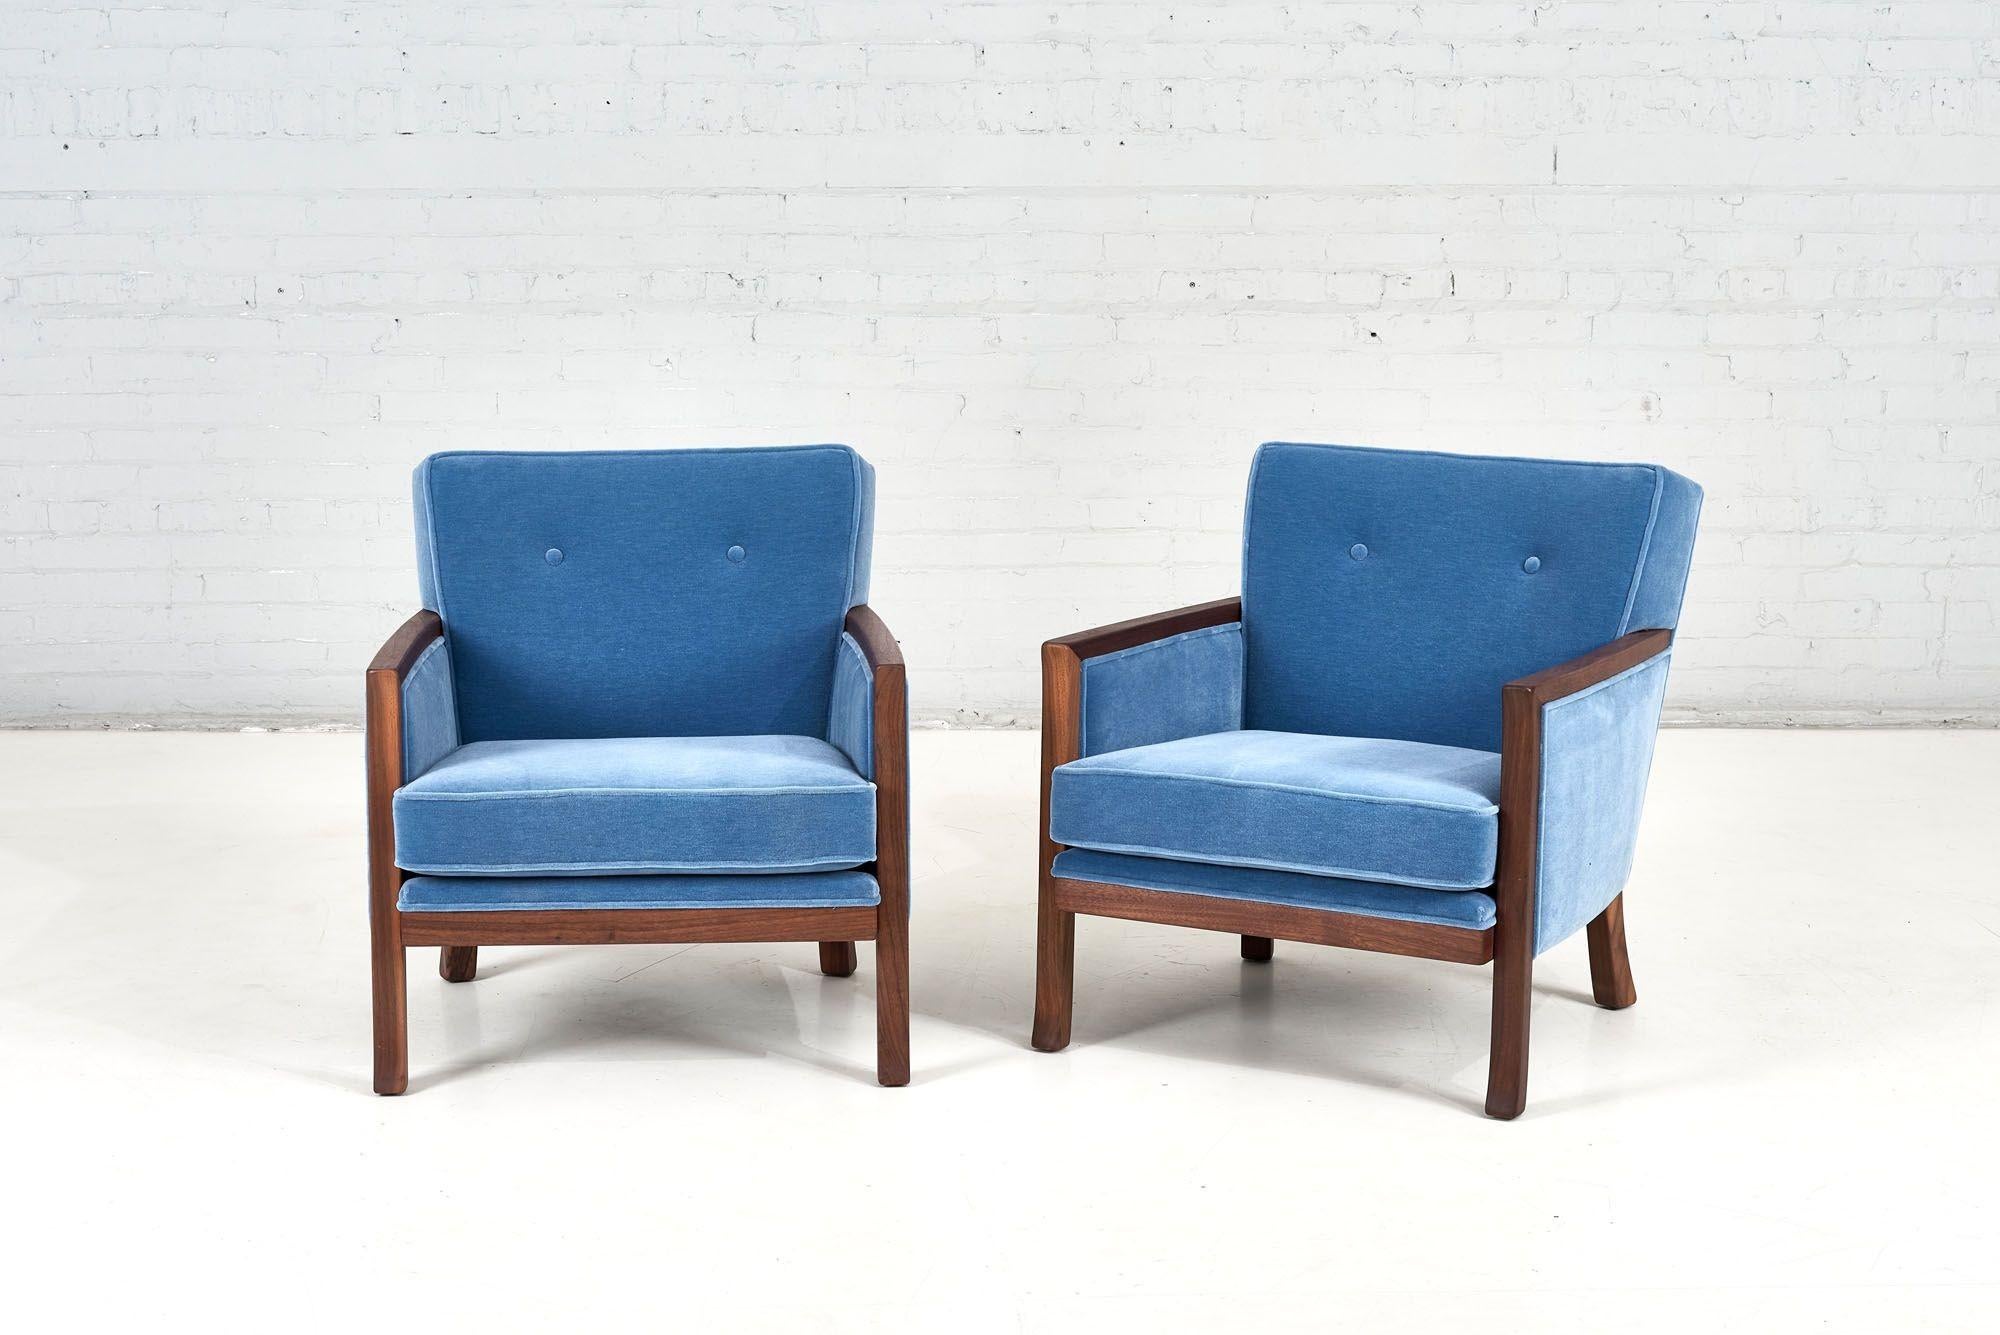 T. H. Robsjohn-Gibbings for Widdicomb lounge chairs, 1960. Fully restored and reupholstered in Mohair.